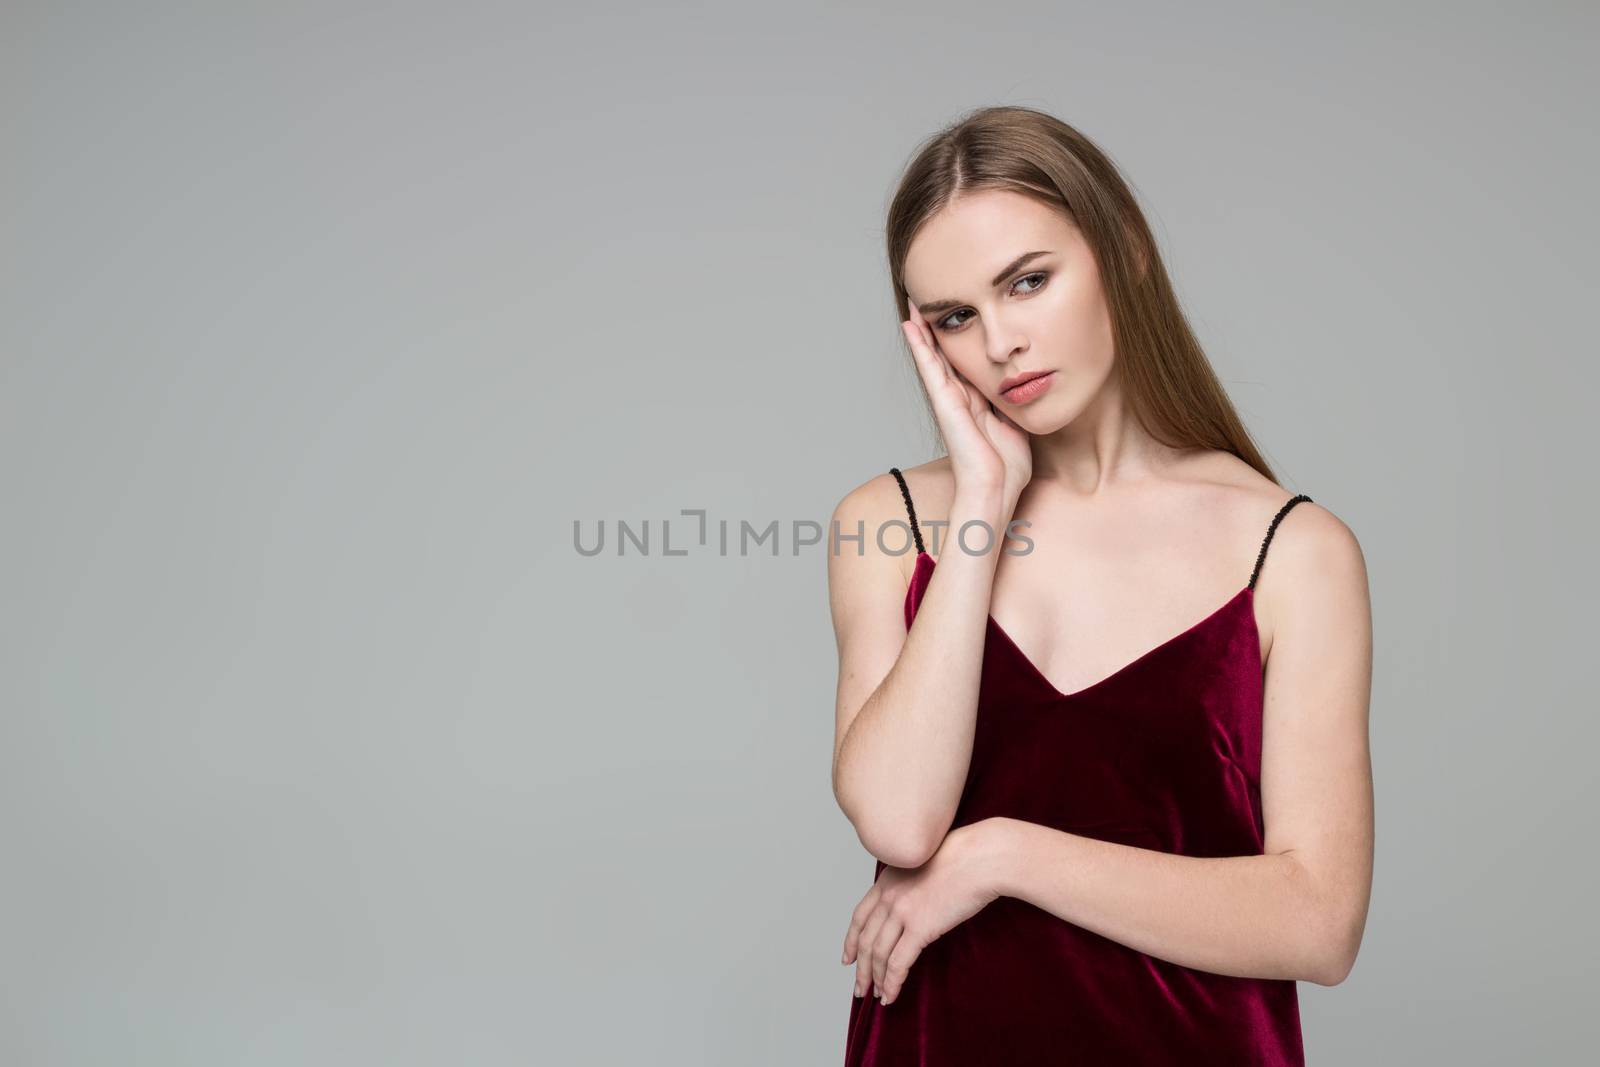 Blond girl in red dress poses showing emotions: wistfulness by VeraVerano